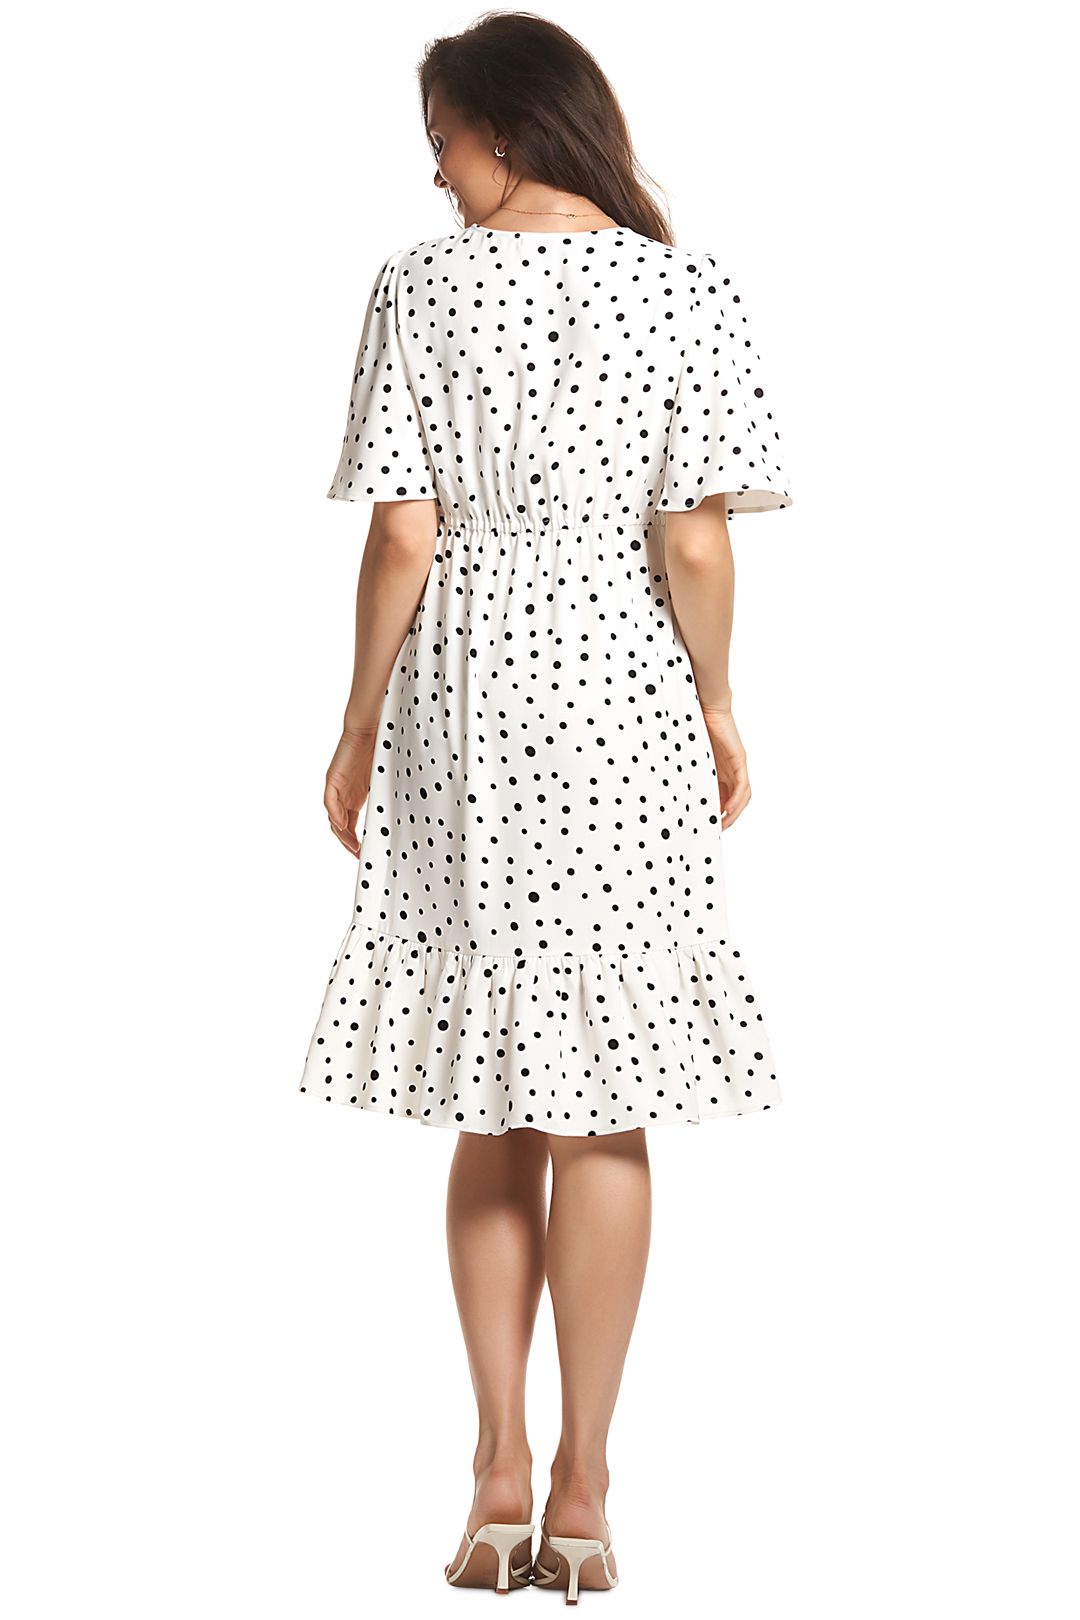 Anika Frill Dress in White Polka Dot by Soon Maternity for Hire